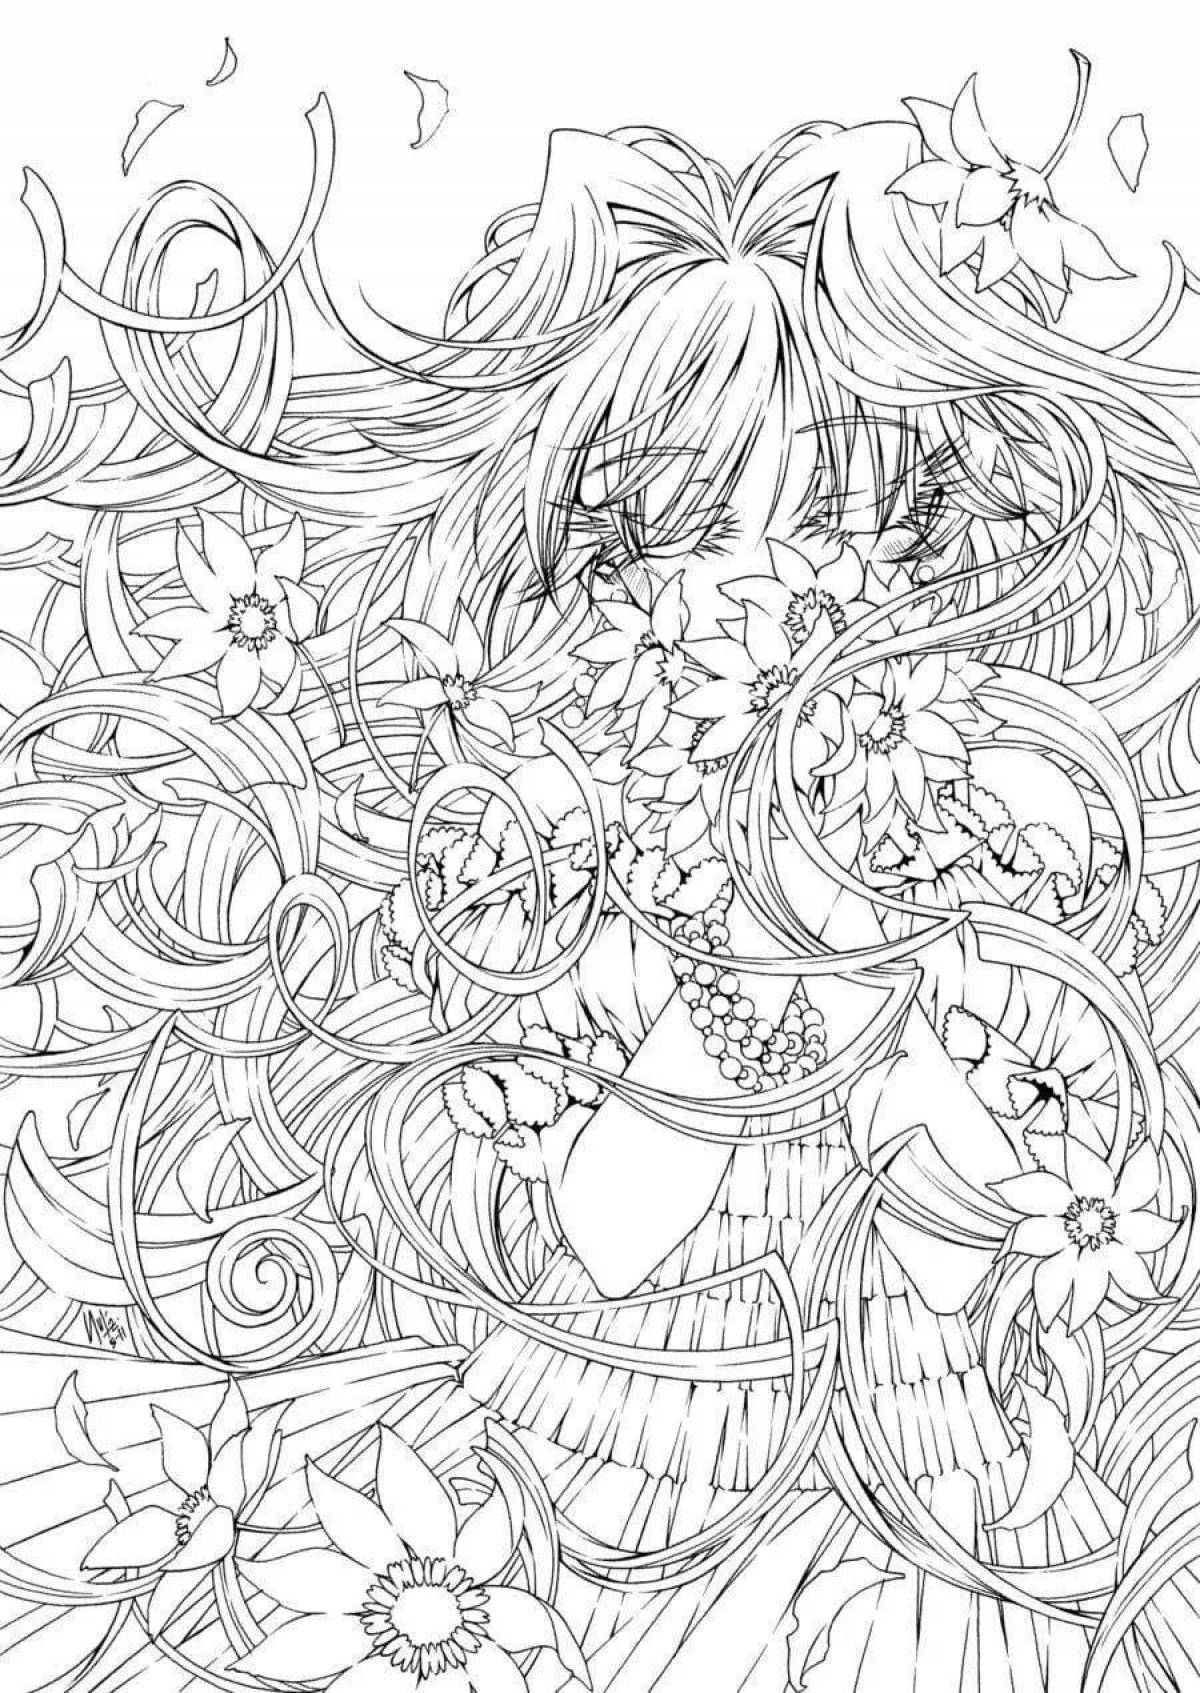 Anime style anti-stress relaxing coloring book